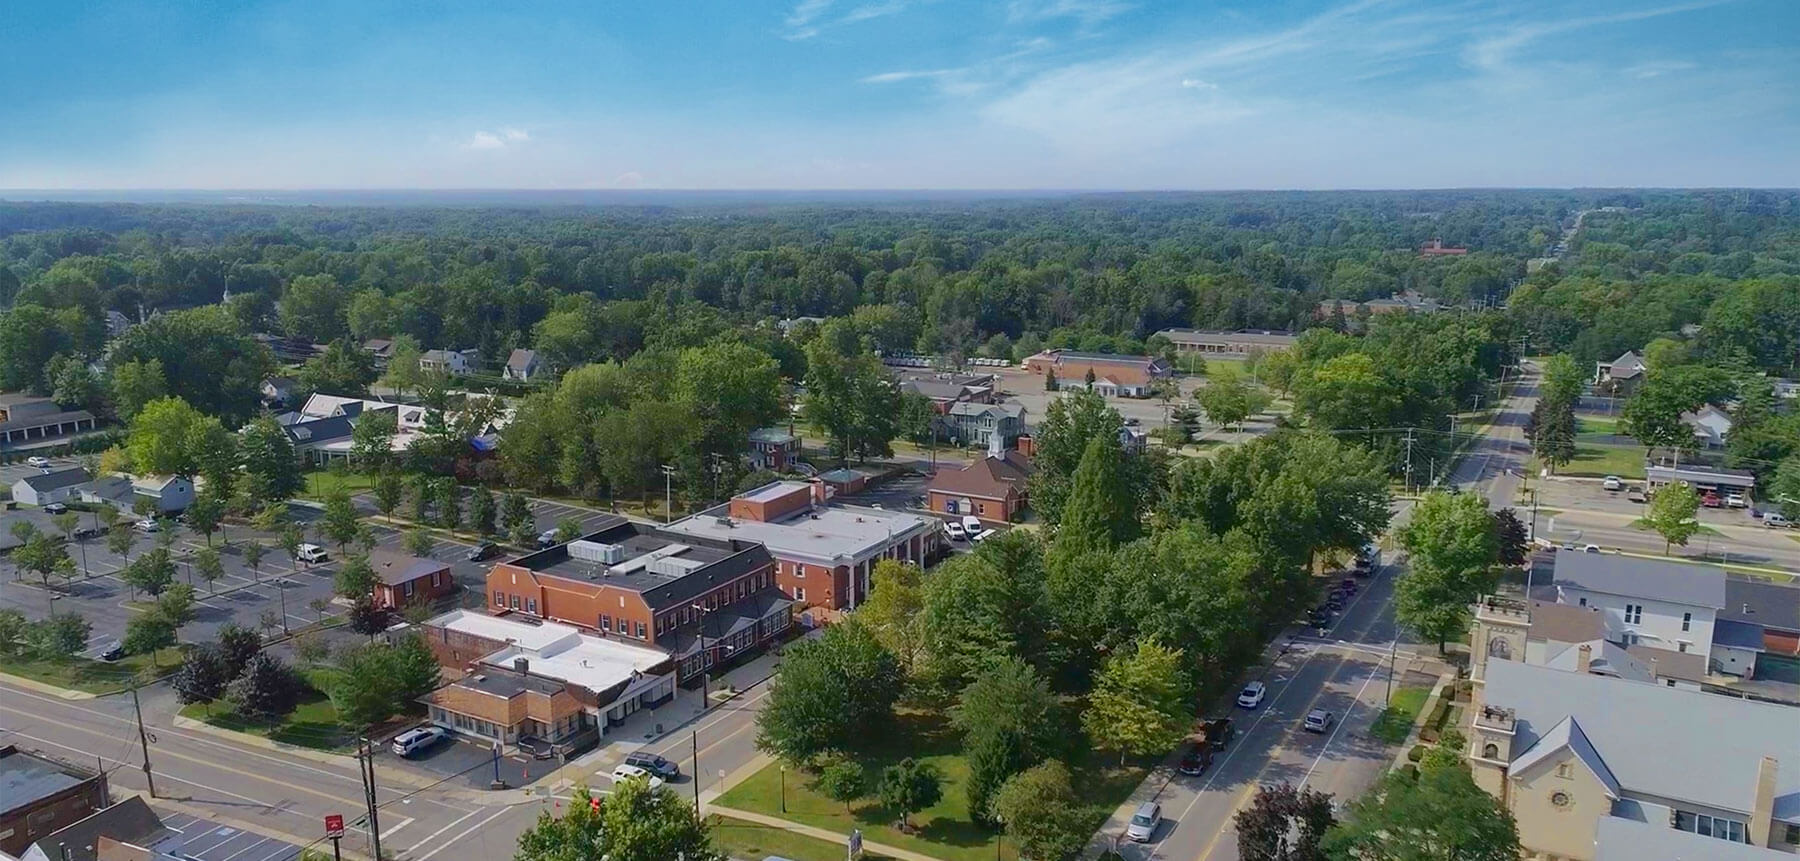 Aerial view of Canfield, Ohio.